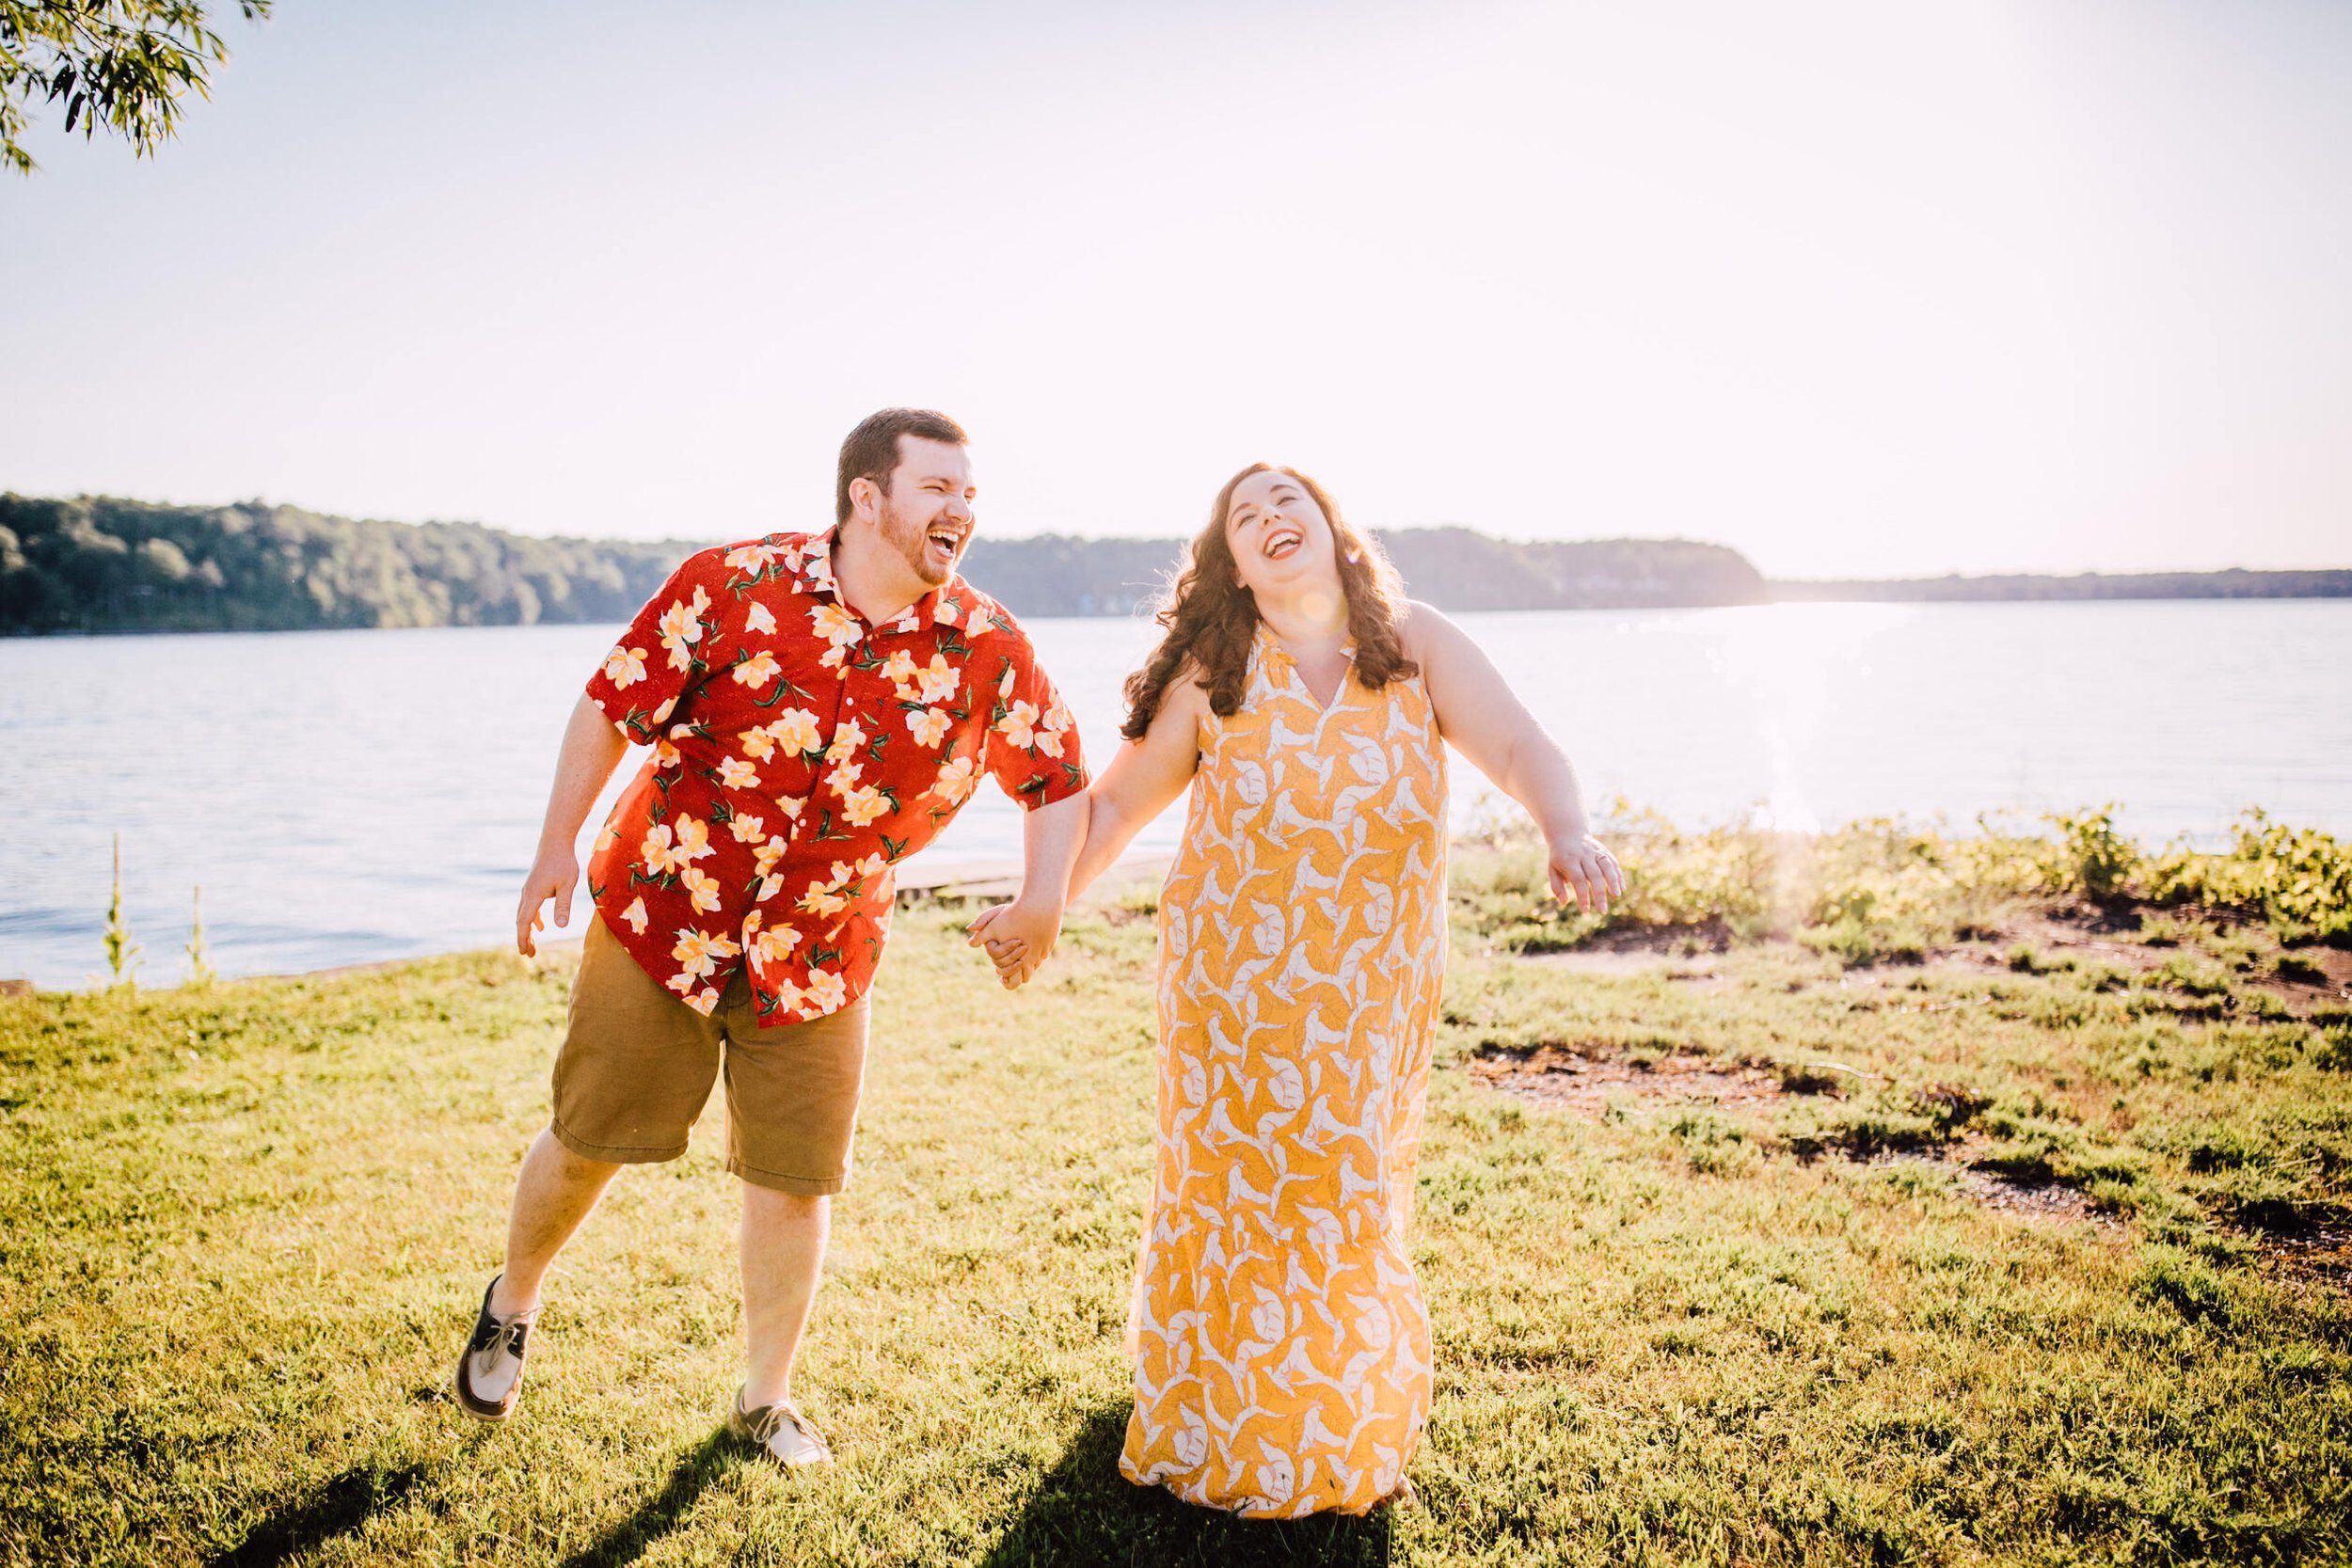  Engaged couple laugh together while walking and holding hands in a grassy area in front of Lake Ontario for their sunset engagement photos 